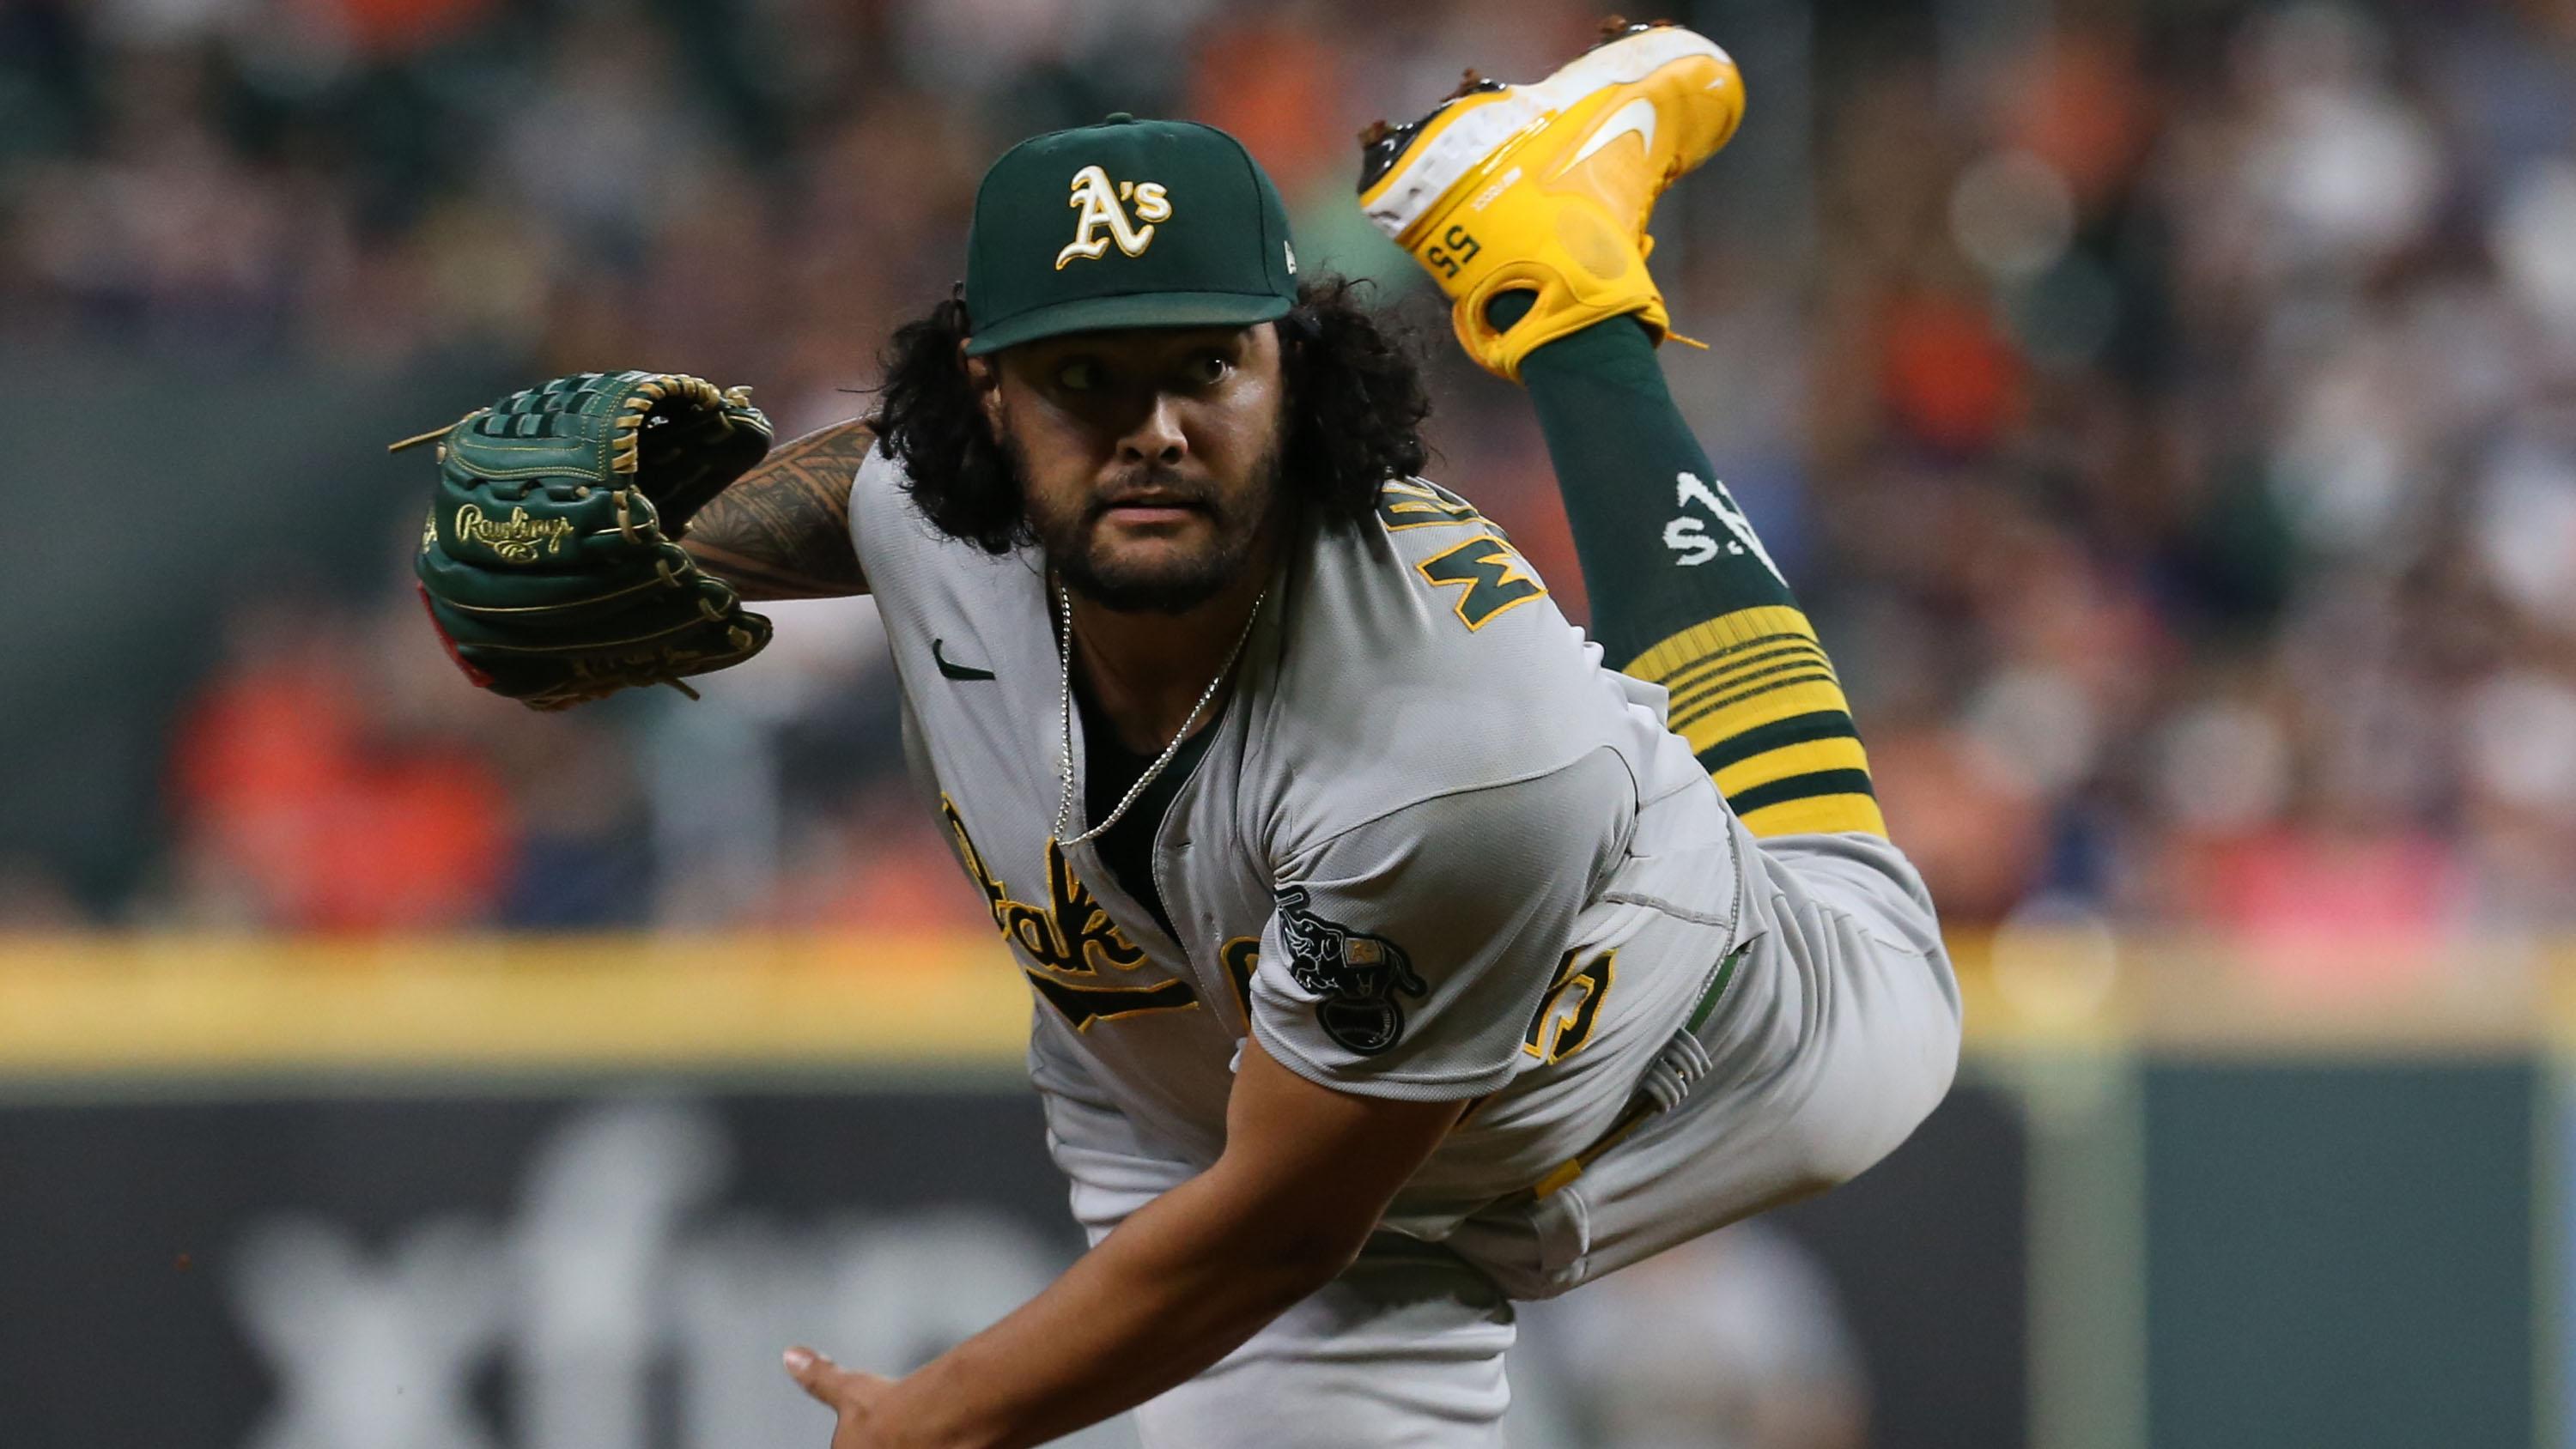 Oakland Athletics starting pitcher Sean Manaea (55) pitches against the Houston Astros in the third inning at Minute Maid Park. / Thomas Shea-USA TODAY Sports